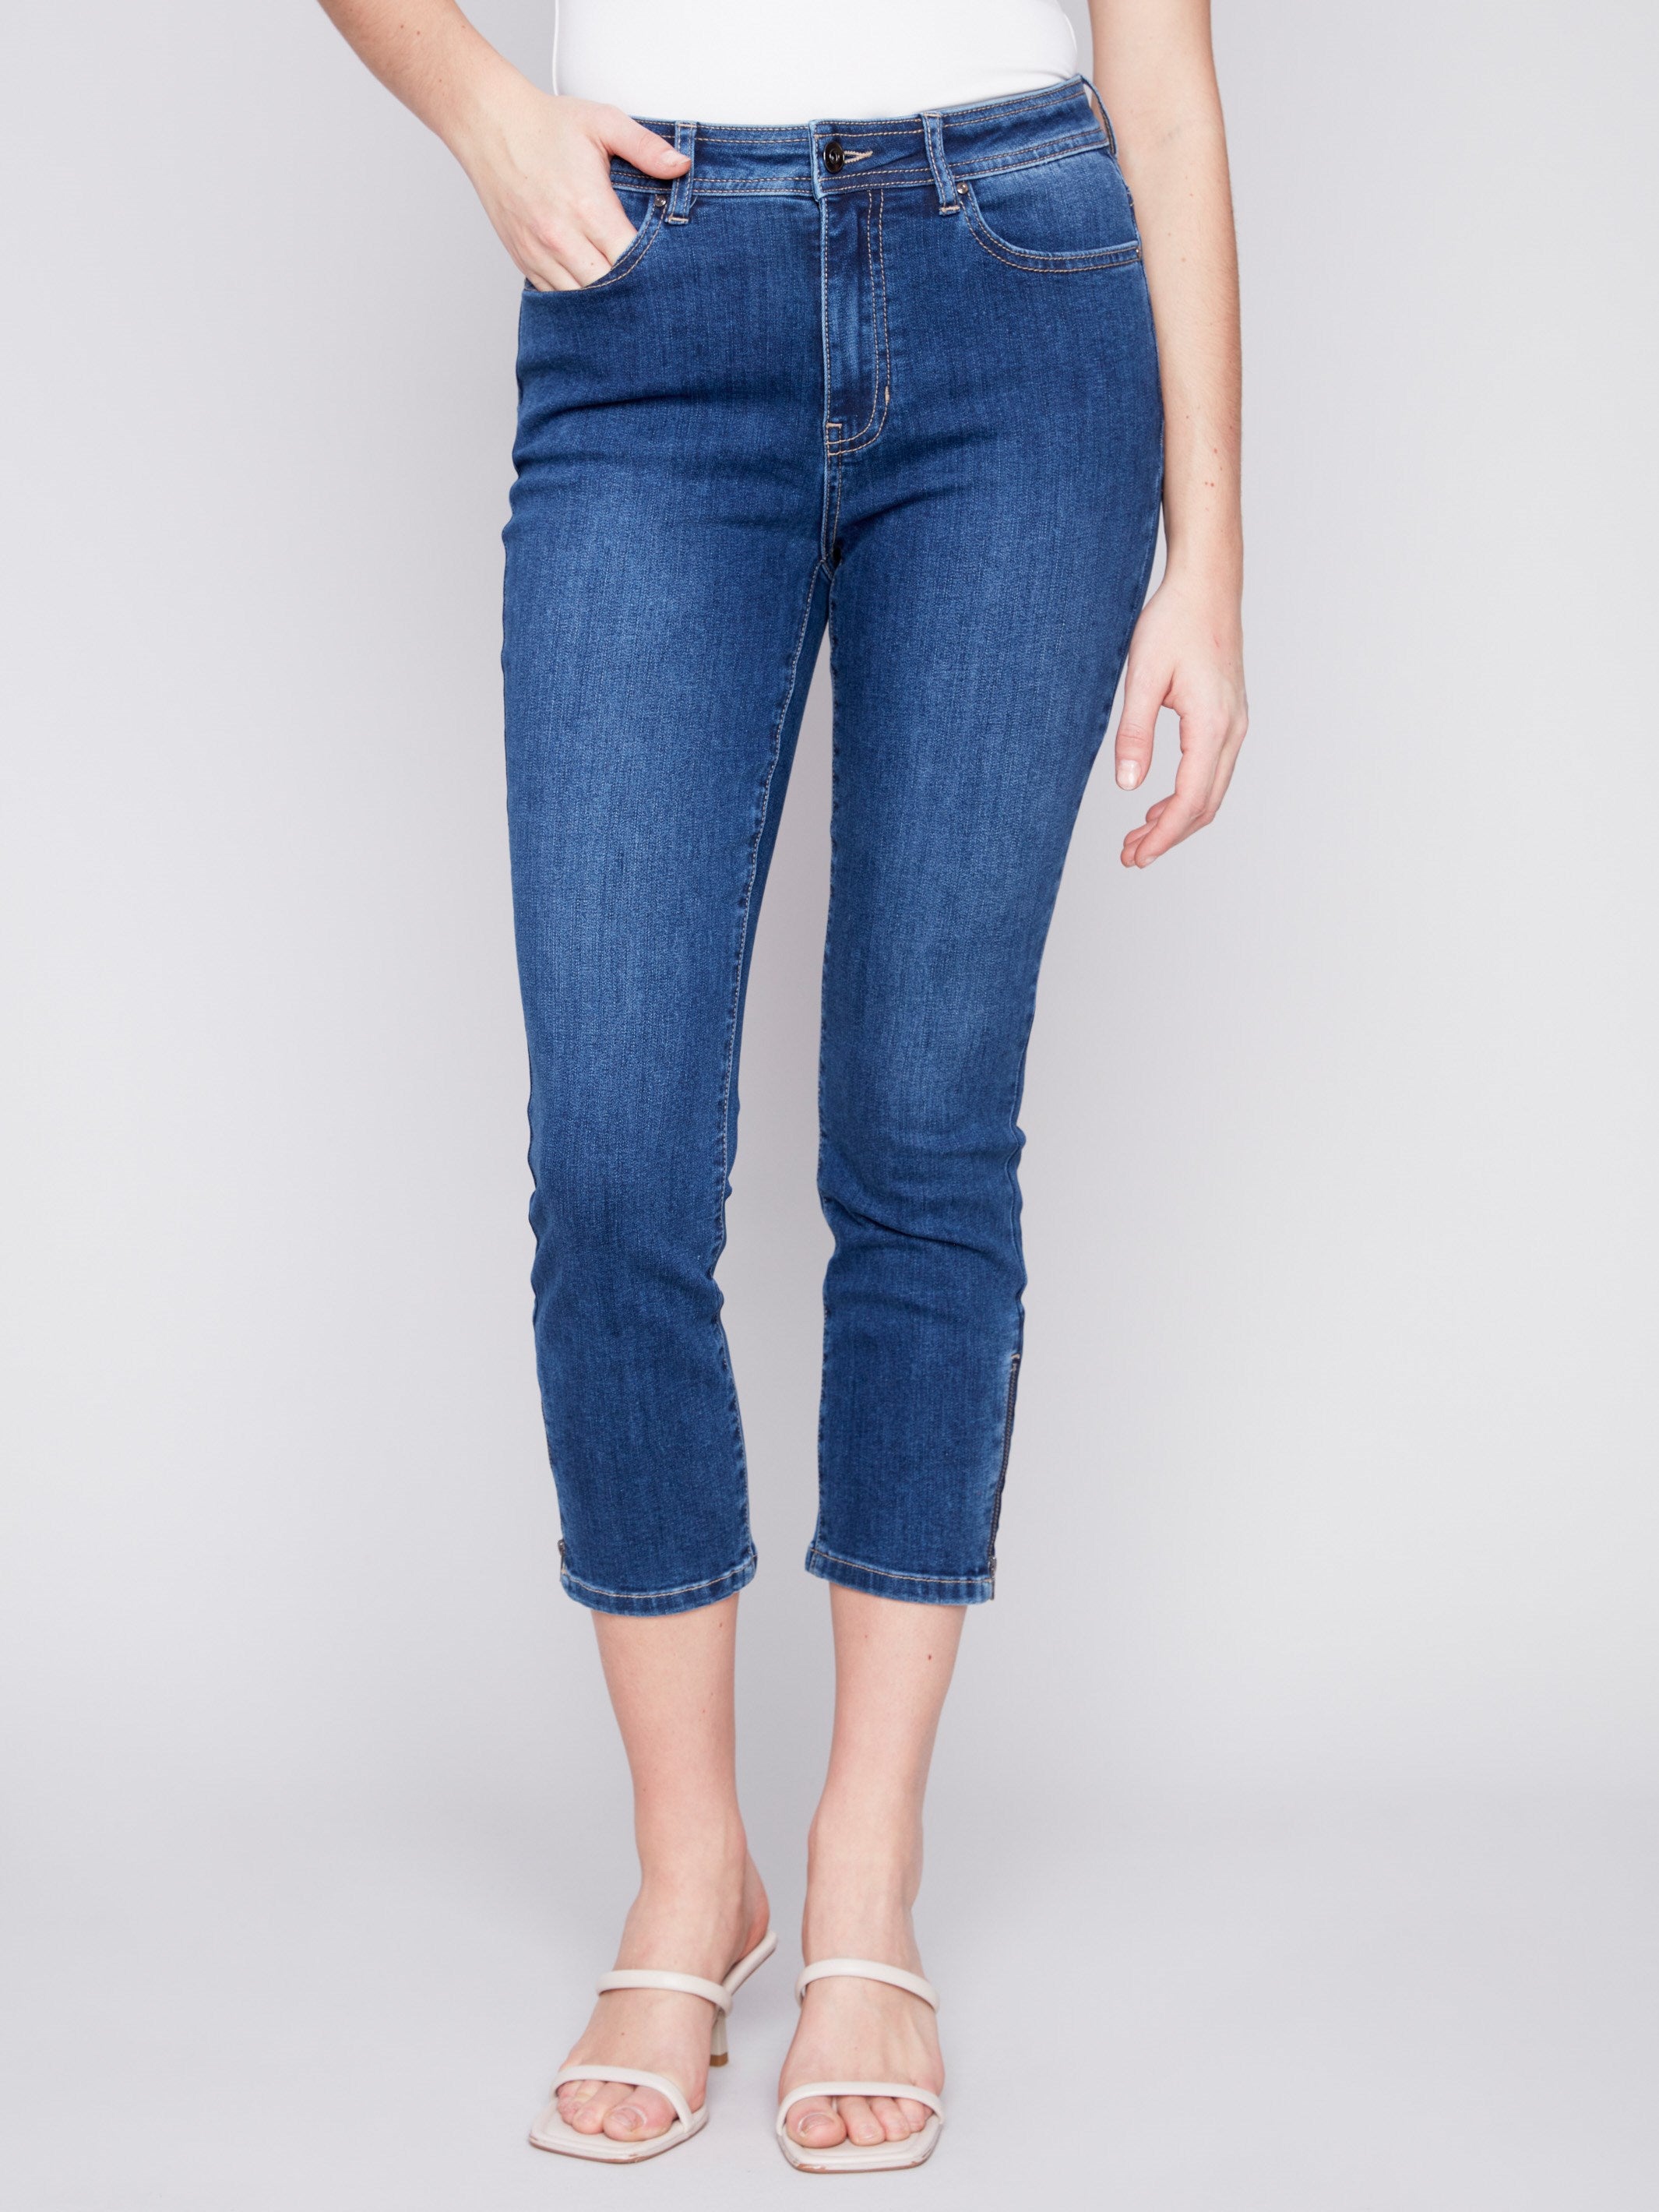 Charlie B Cropped Jeans with Zipper Detail - Indigo - Image 2